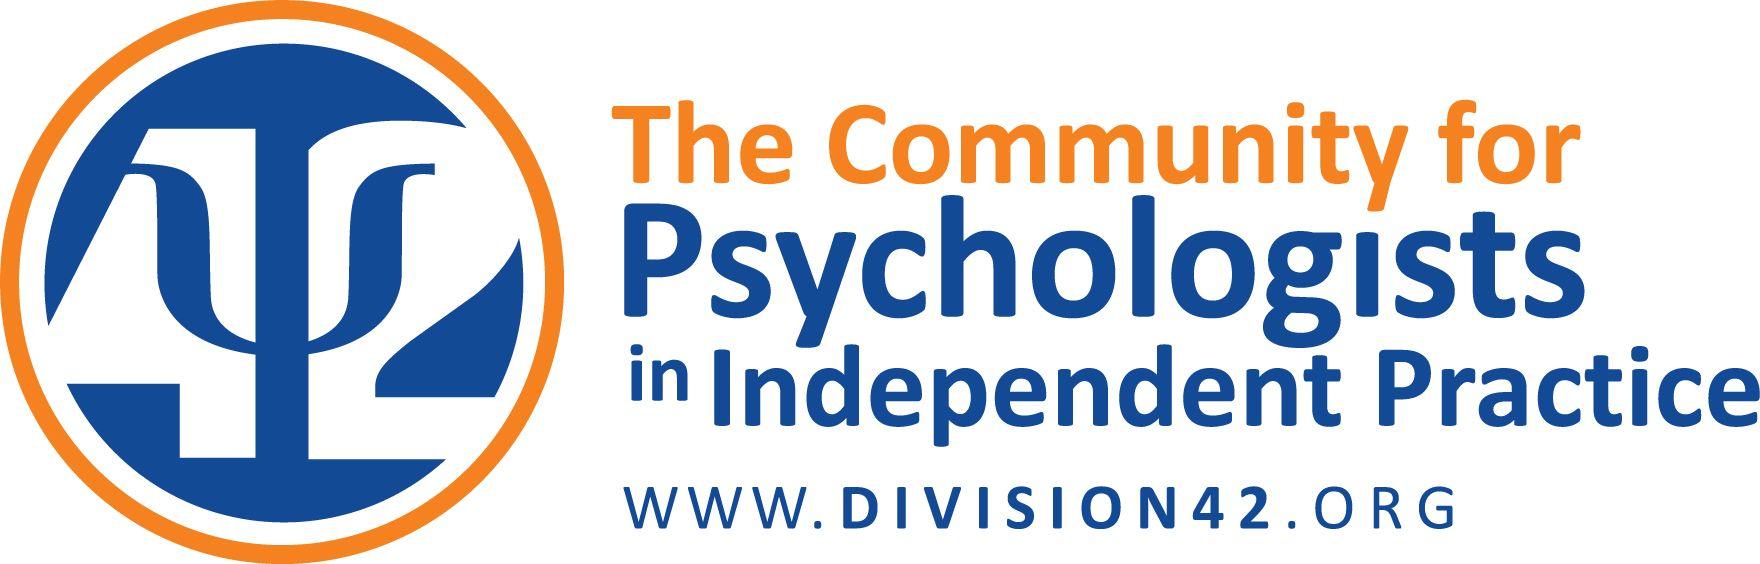 Apa.org Logo - APA Division 42 Psychologists in Independent Practice